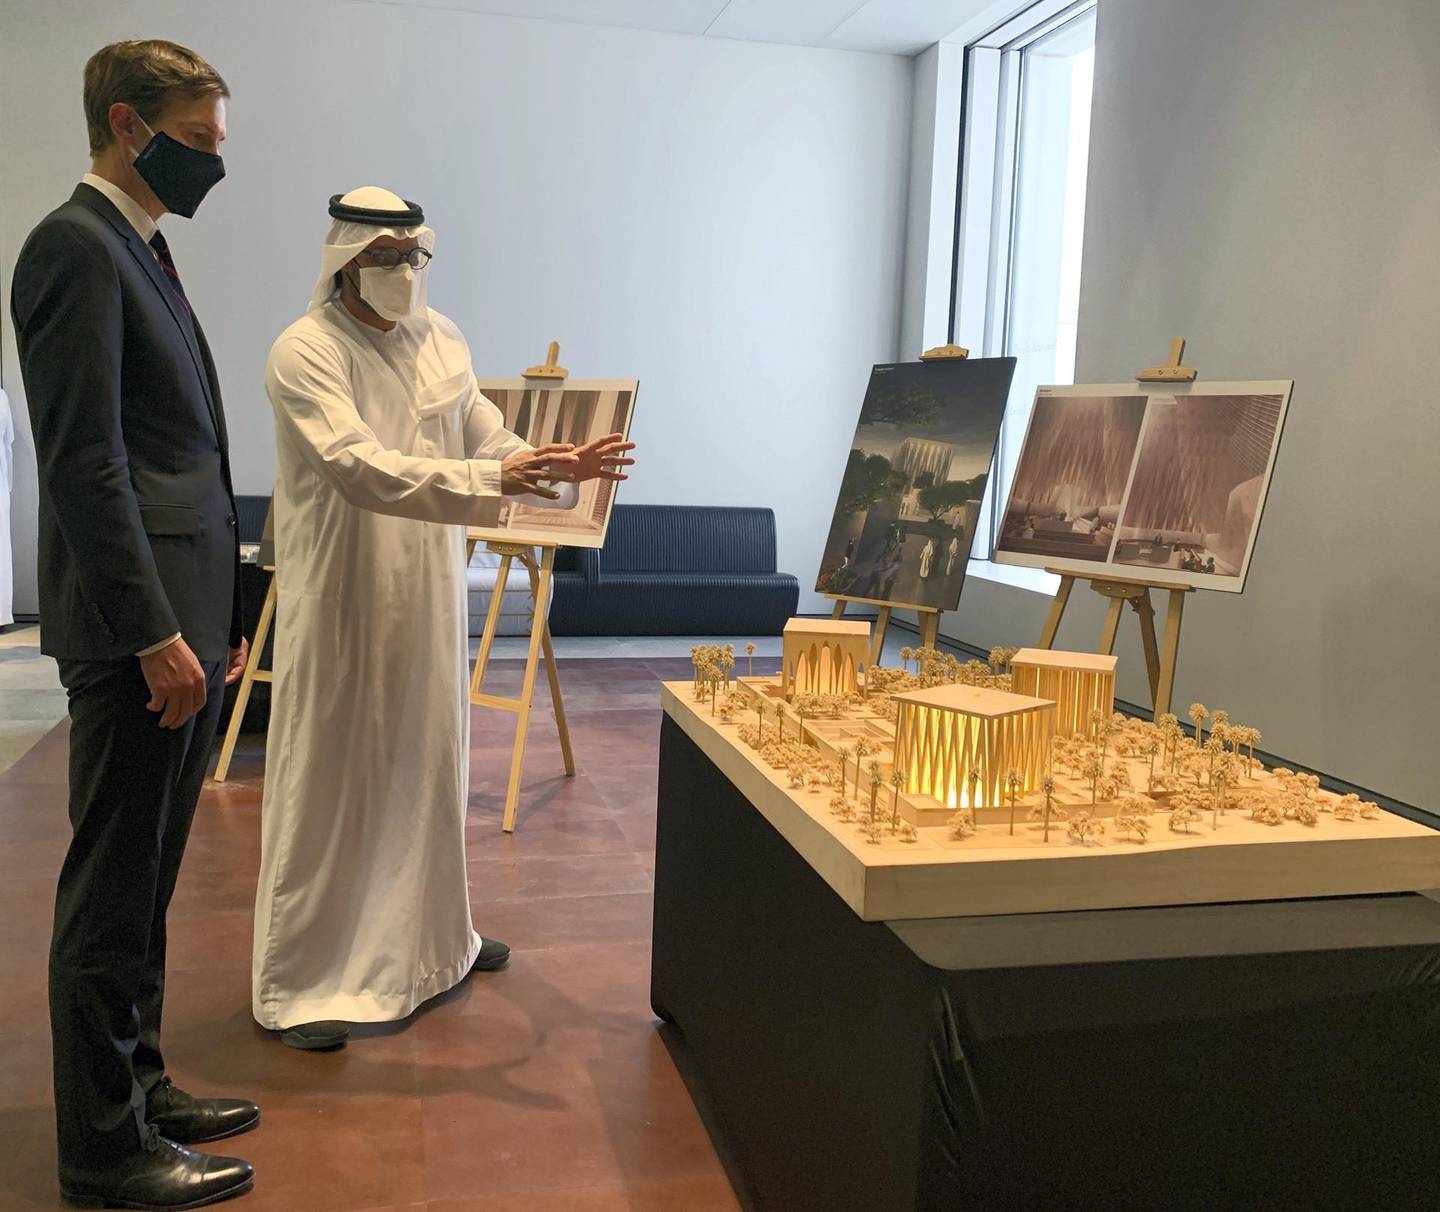 Jared Kushner, Senior adviser to the US President, being shown a replica of the Abrahamic Family House, a planned interfaith prayer site, at Louvre Abu Dhabi. Twitter/ @USAinUAE